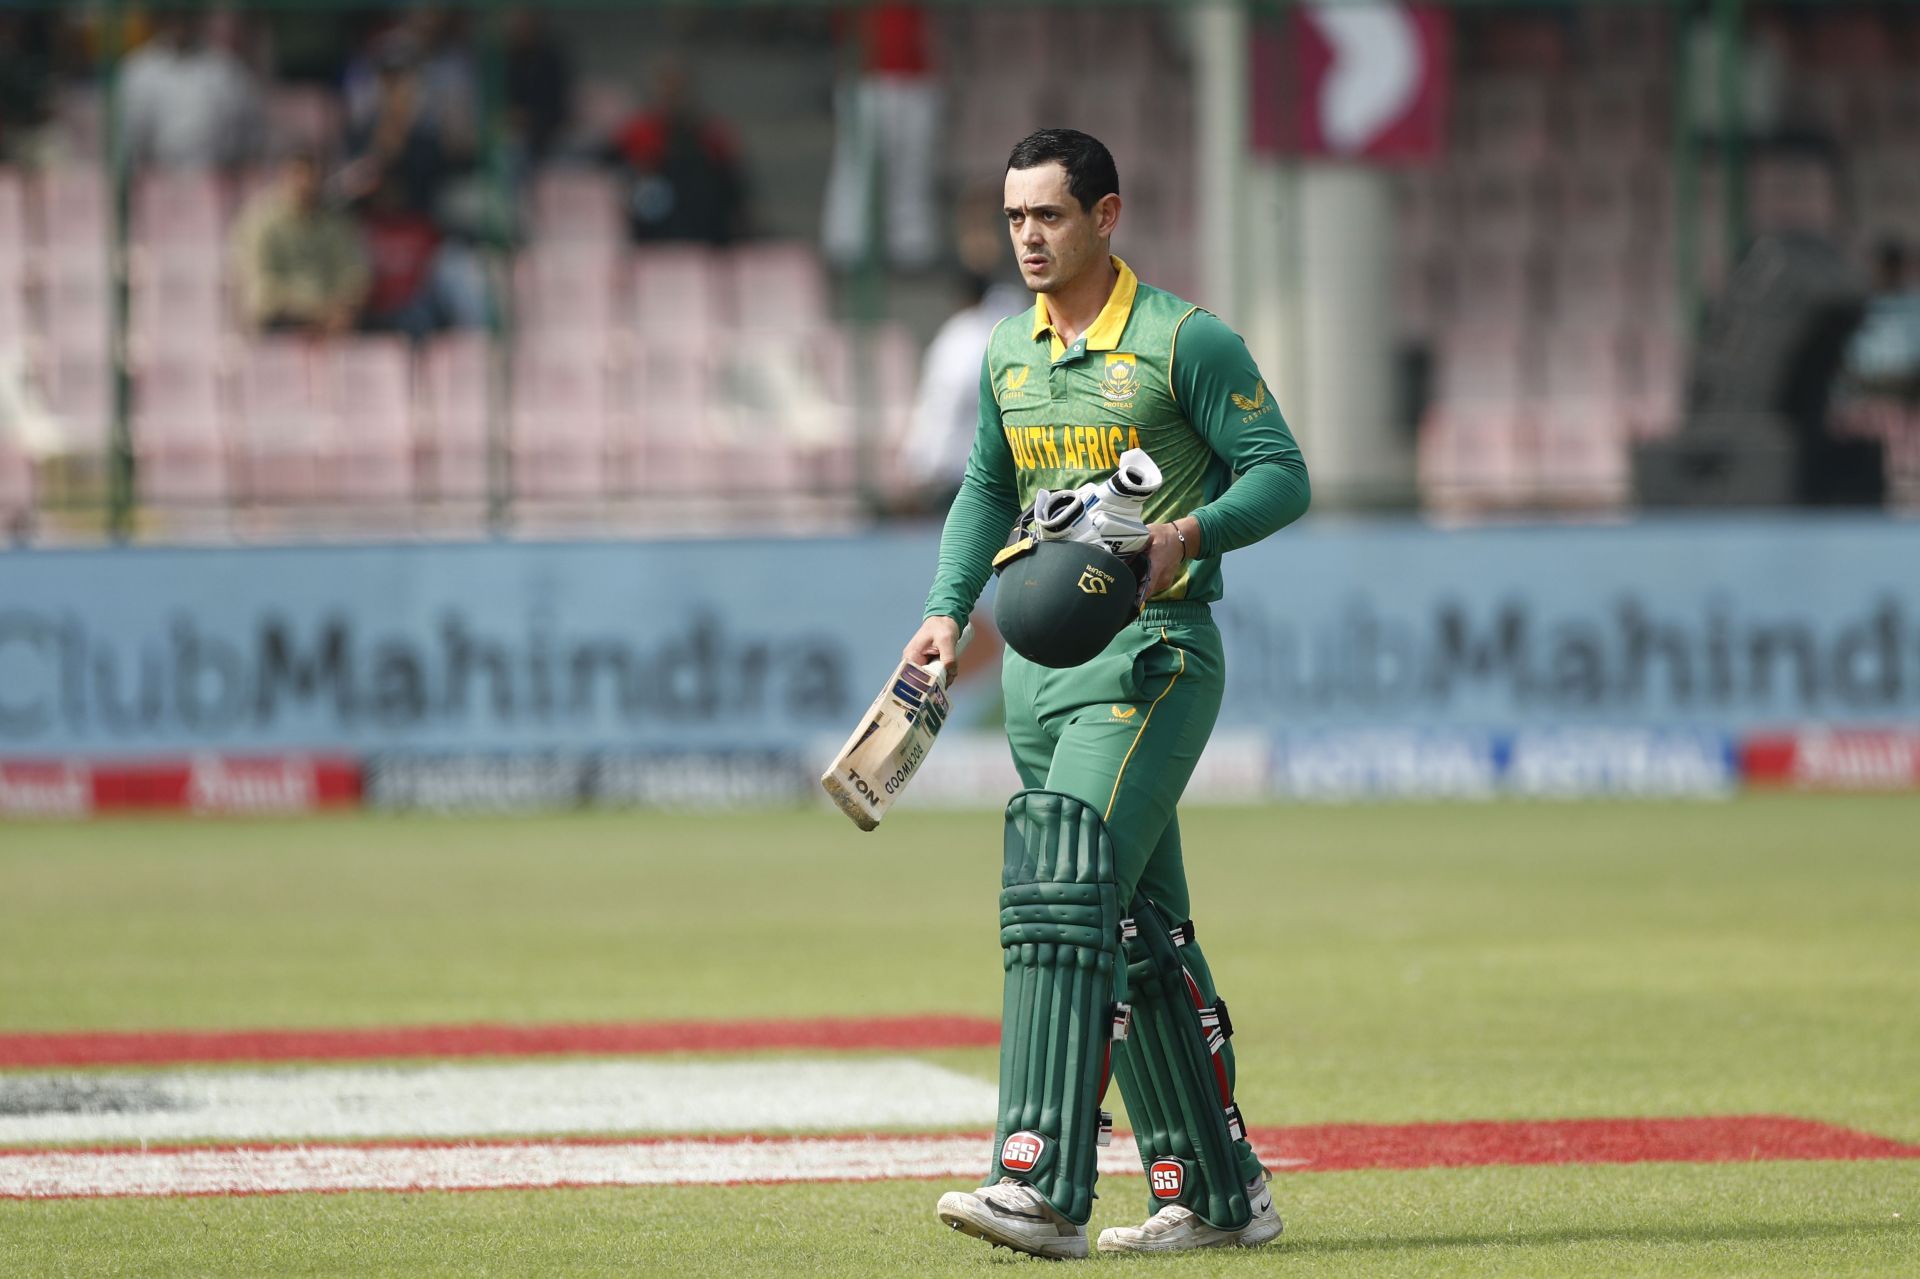 South Africa were unable to reach triple digits